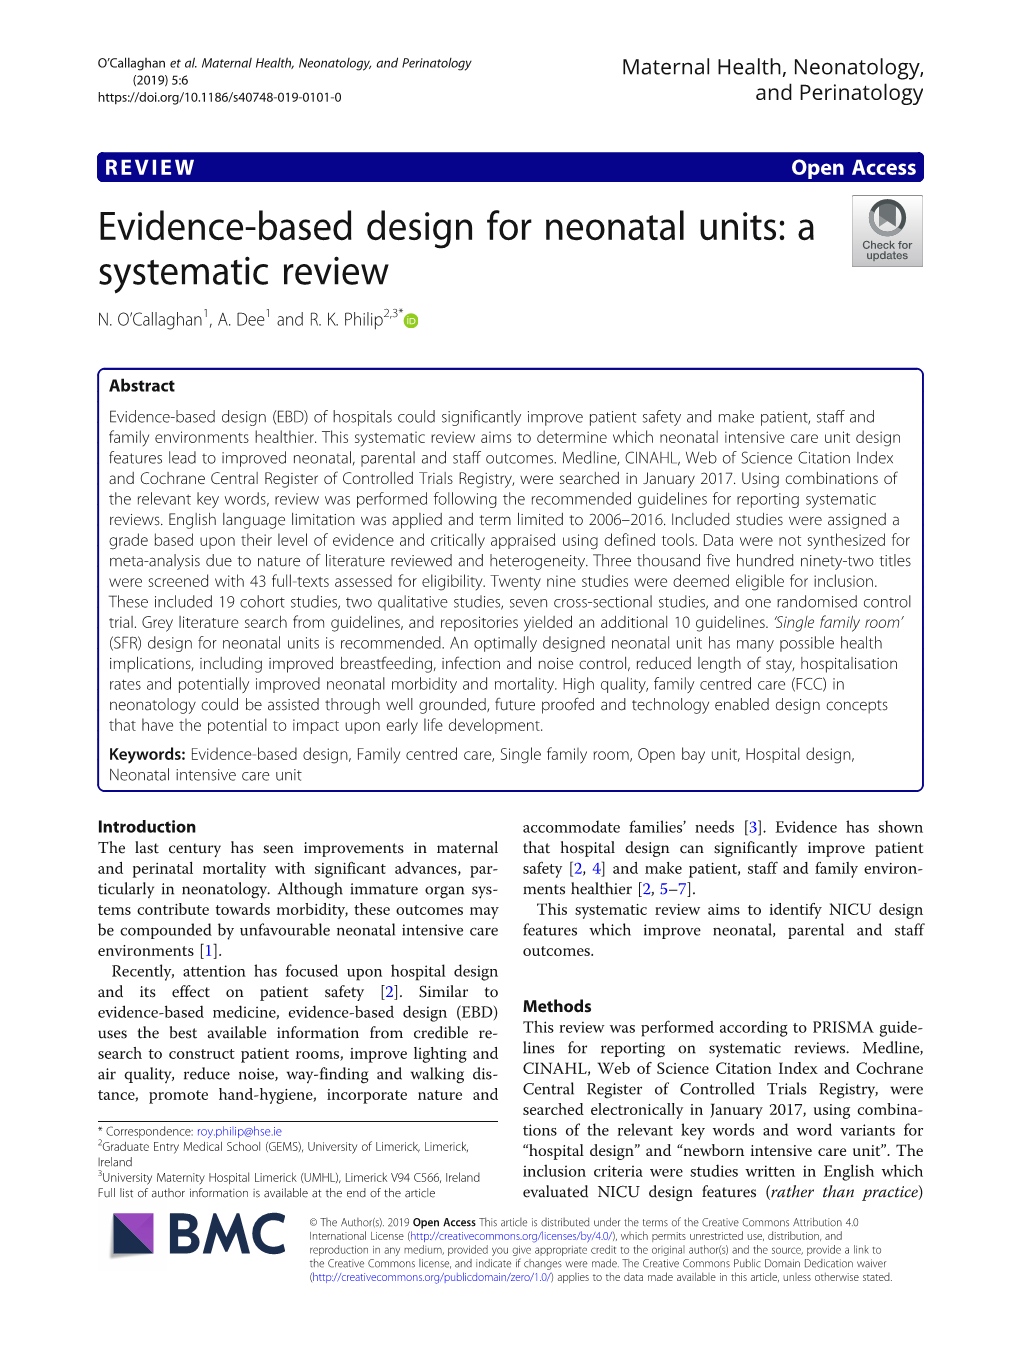 Evidence-Based Design for Neonatal Units: a Systematic Review N